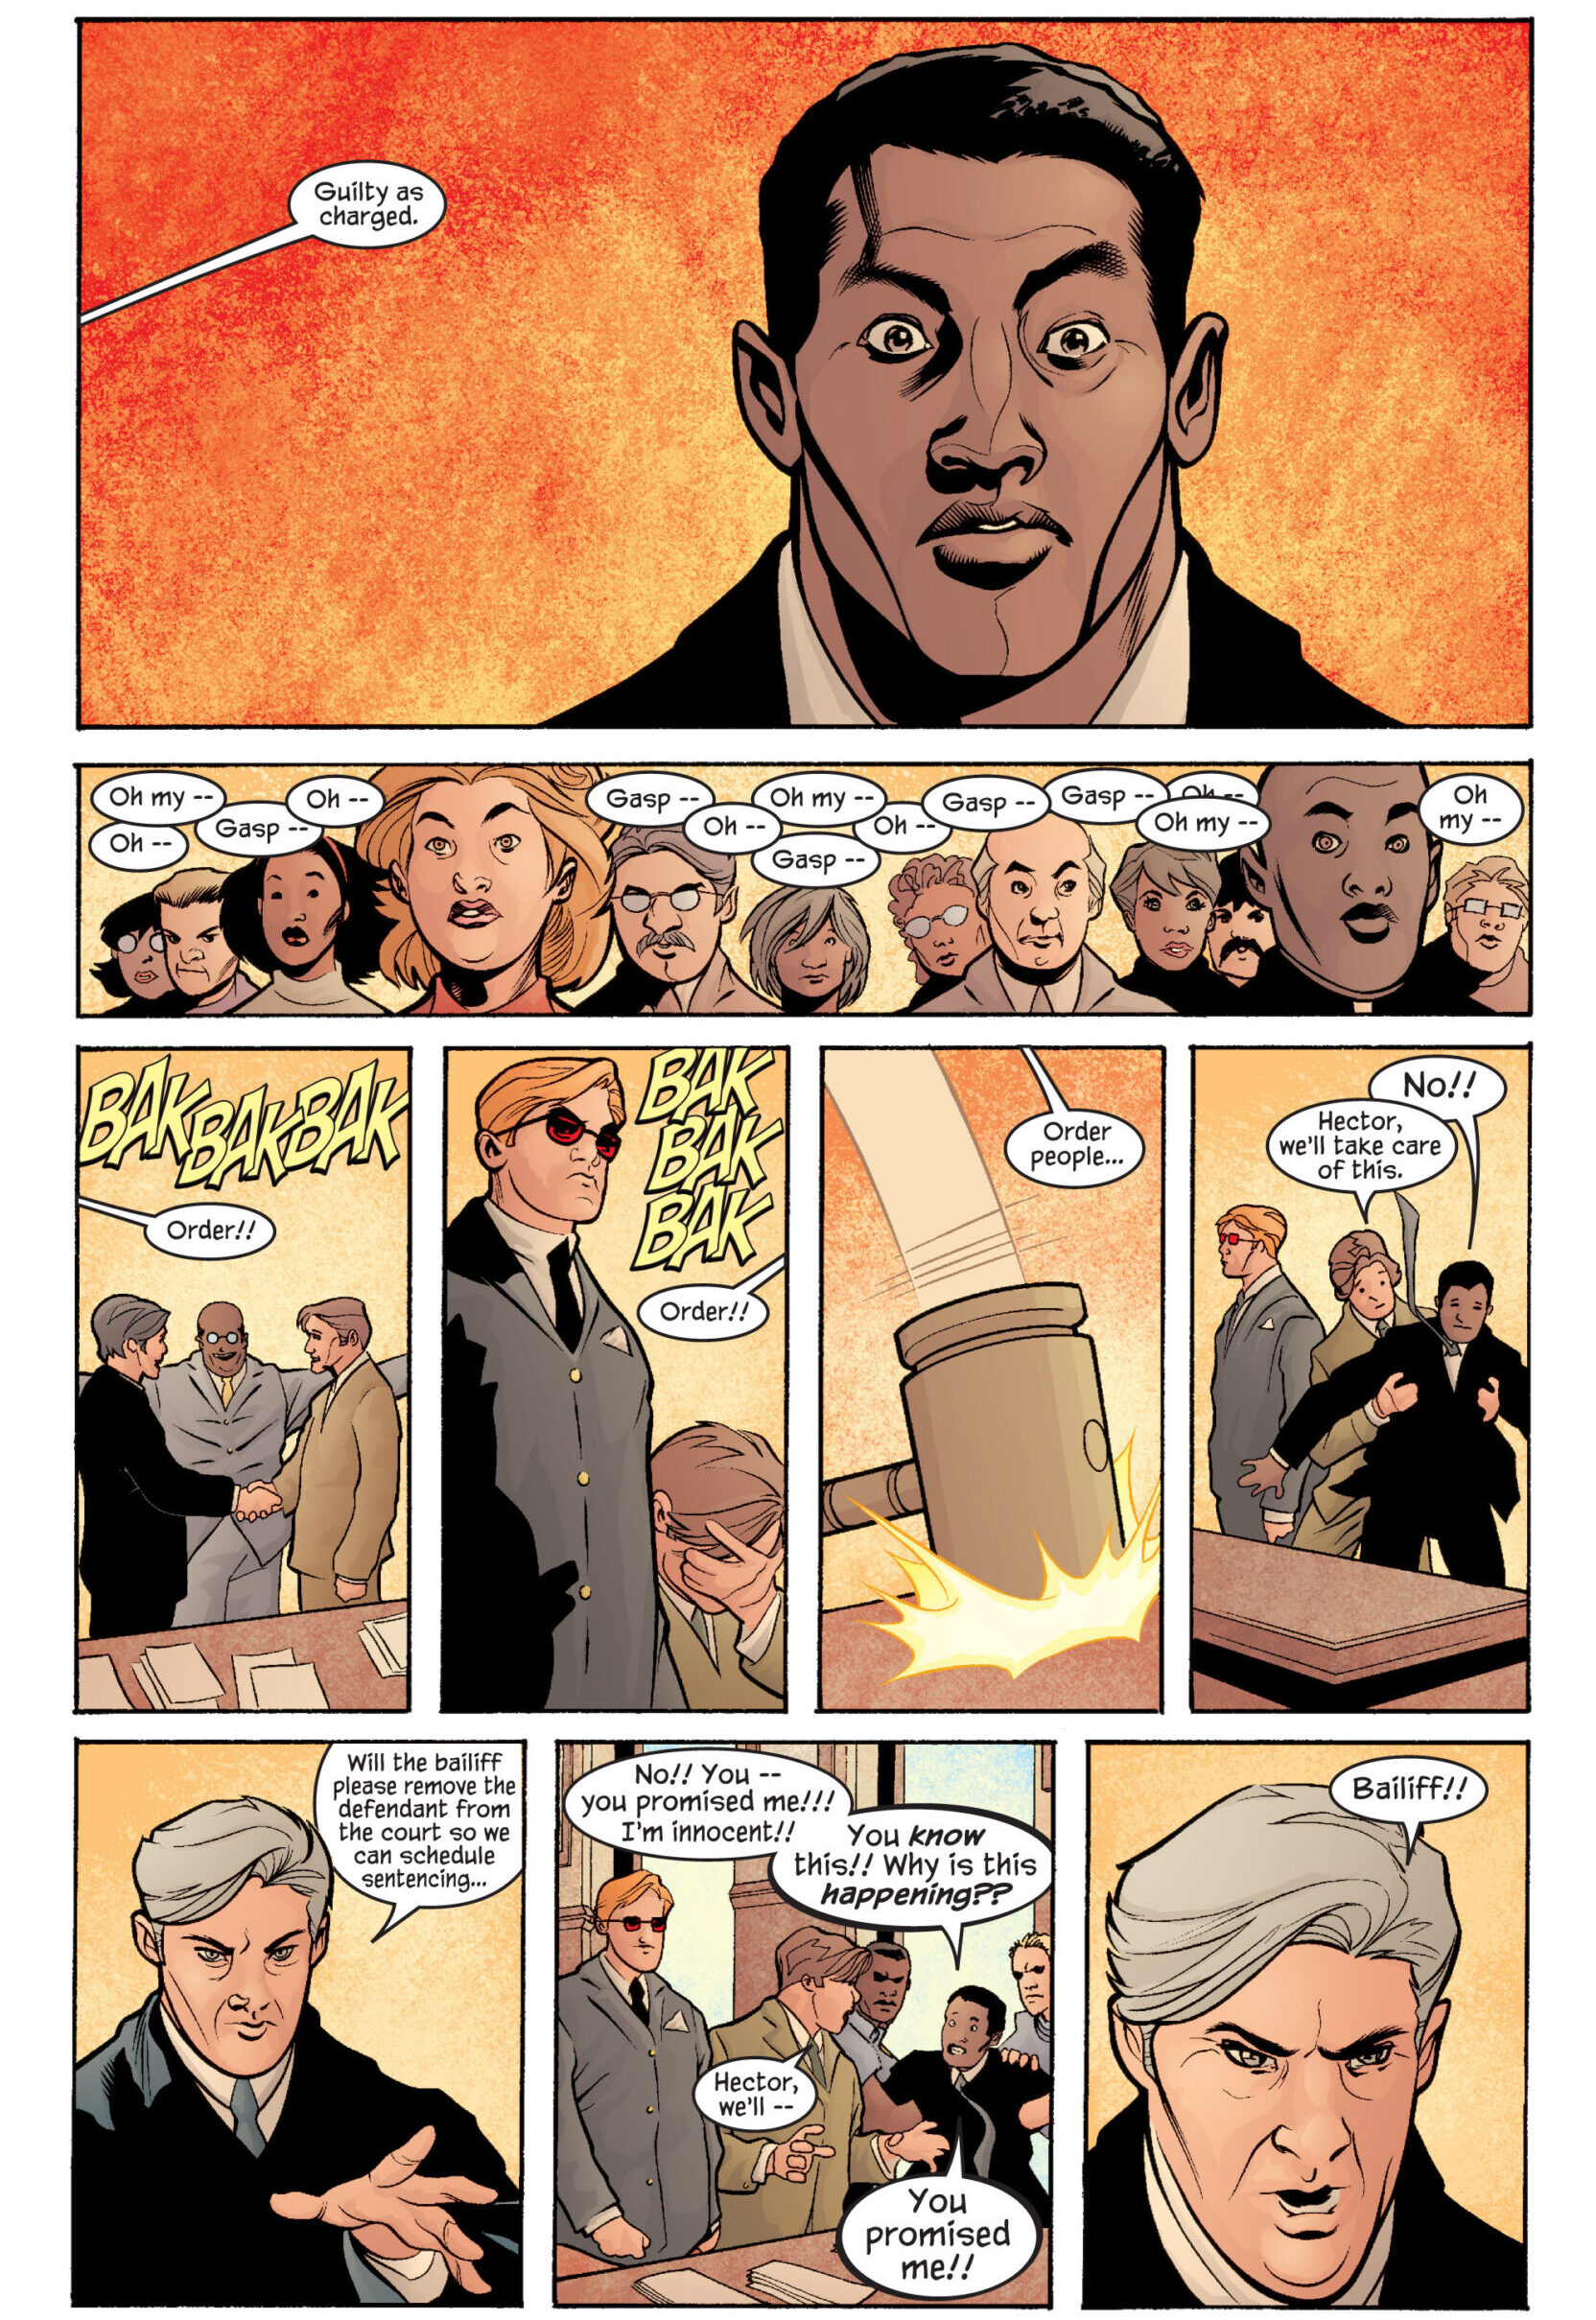 Hector Ayala is found guilty of a murder he did not commit in Daredevil Vol. 2 #38 "The Trial of the Century, Part 1" (2002), Marvel Comics. Words by Brian Michael Bendis, art by Terry Dodson, Rachel Dodson, Matt Hollingsworth, and Richard Starkings.